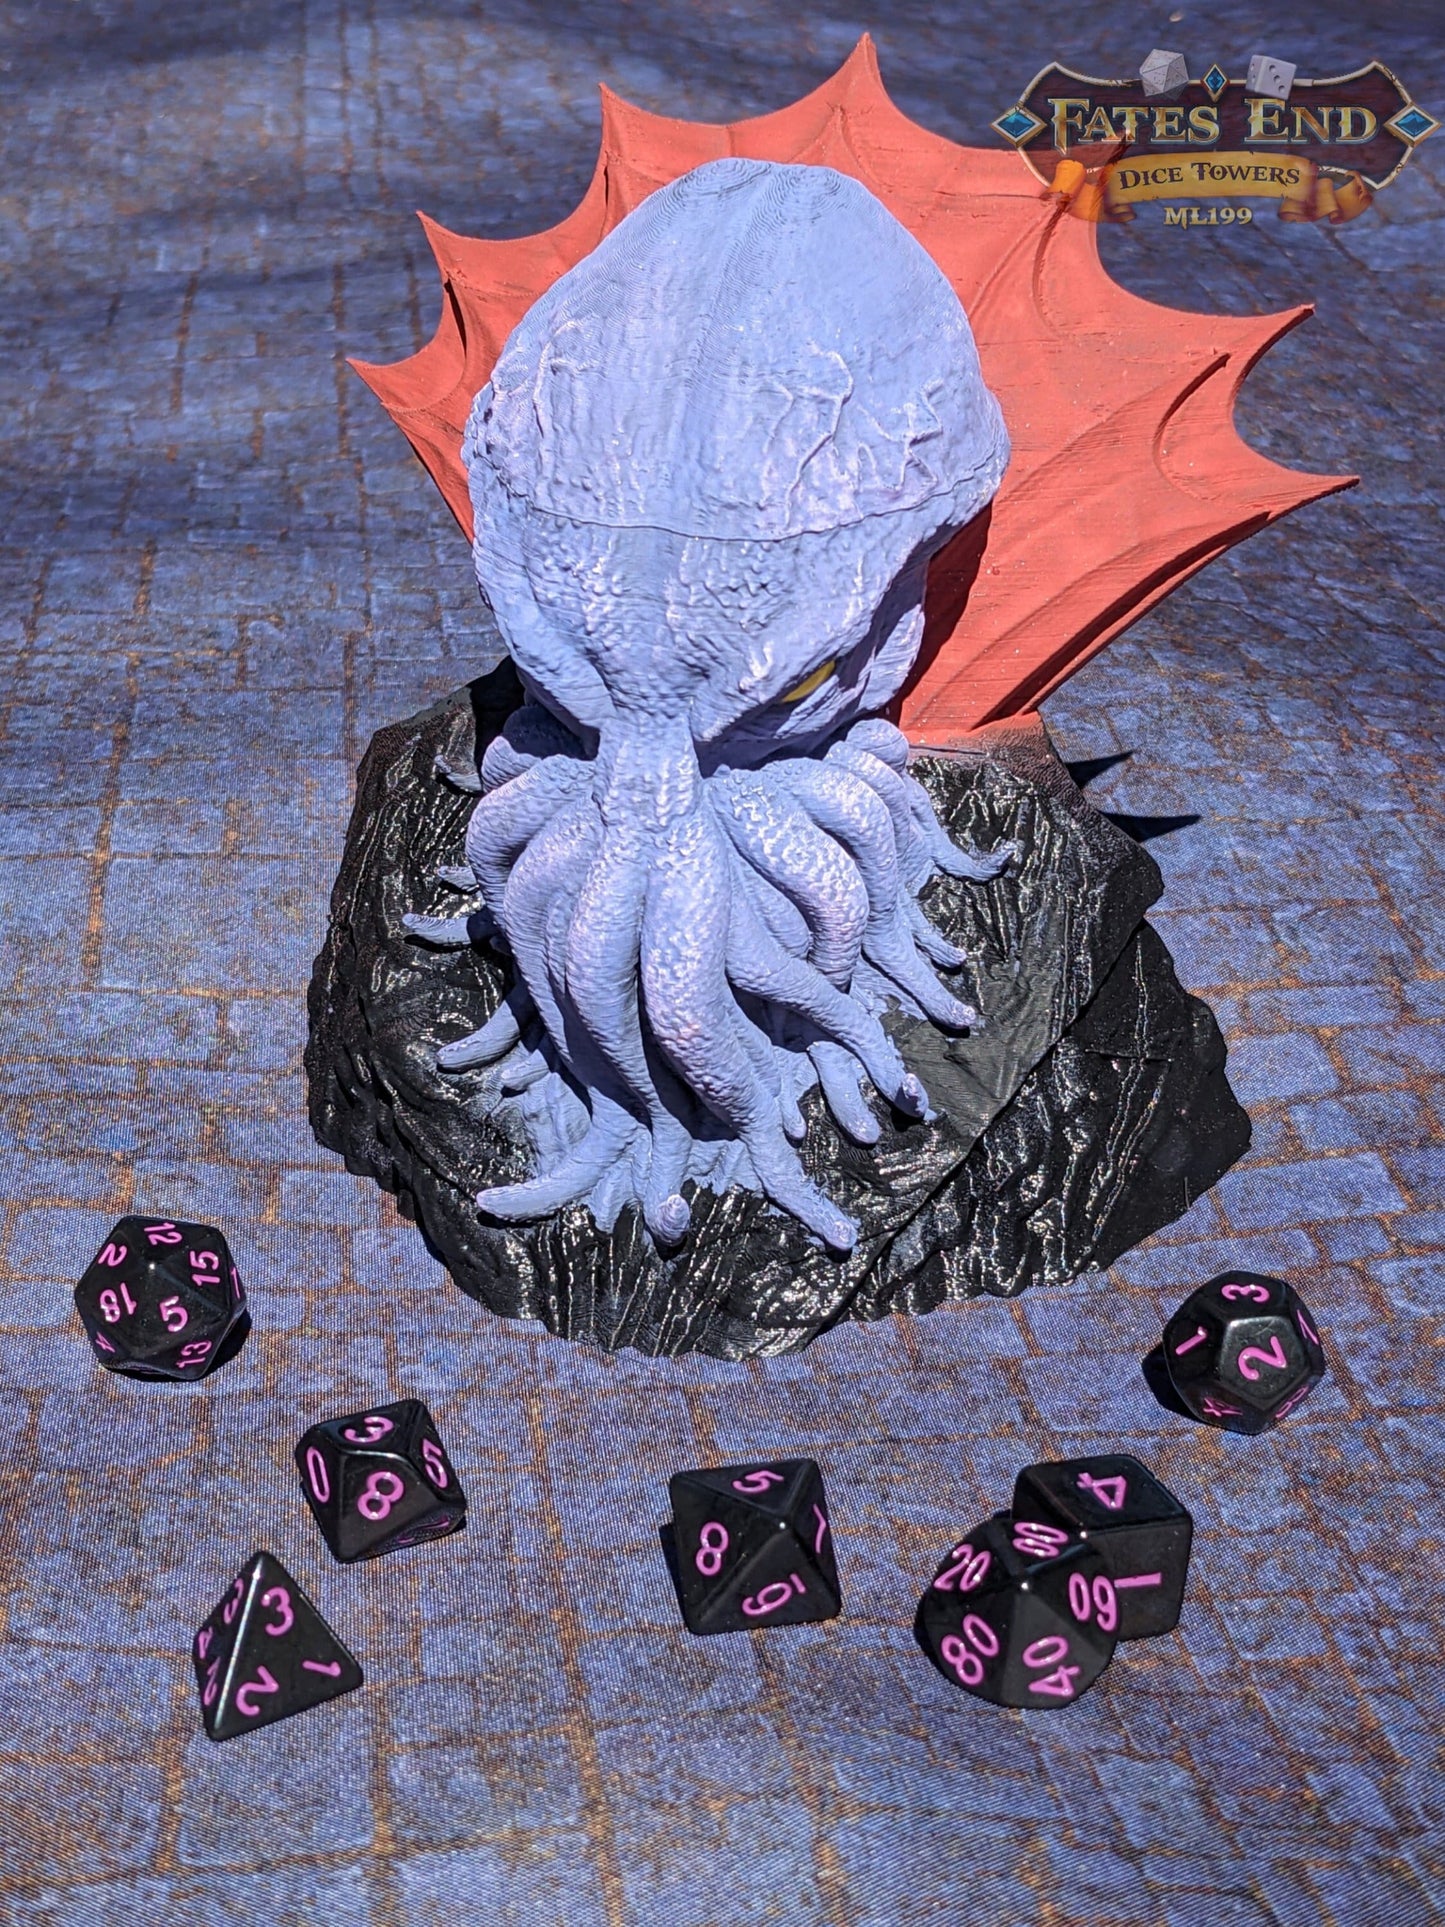 Mind Flayer 3D Printed Dice Box/Jail/Vault/Prison - Fate's End Collection - RPG Tabletop Gaming Cosplay - Dungeons and Dragon DnD Wargaming.